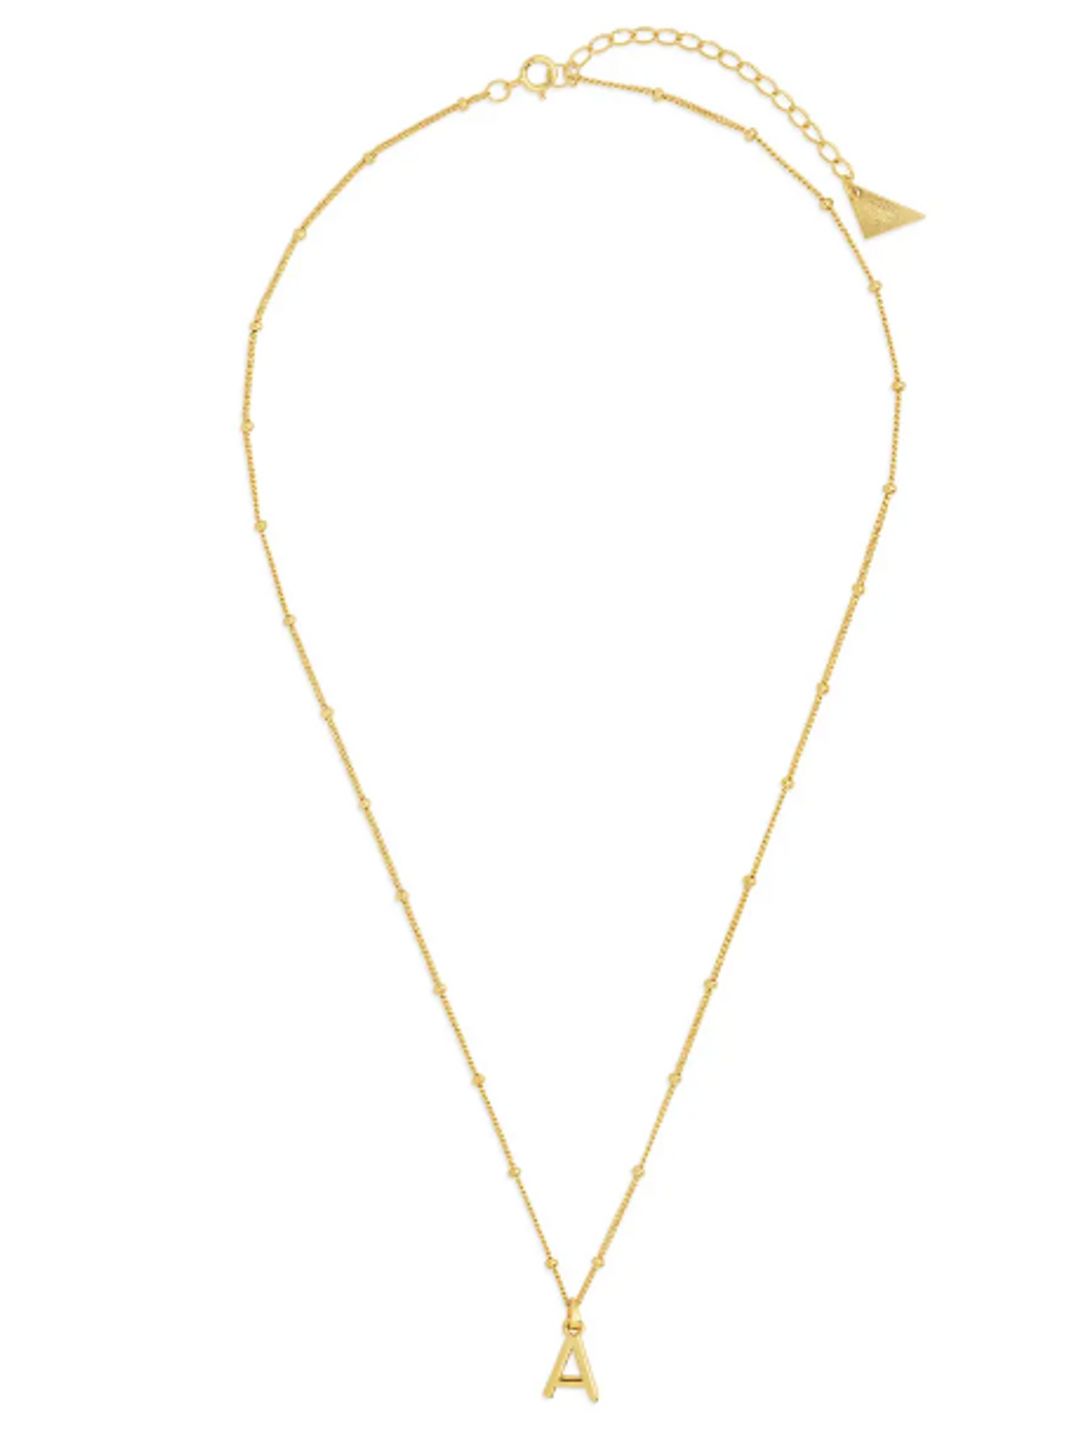 gold initial necklace from nordstrom rack